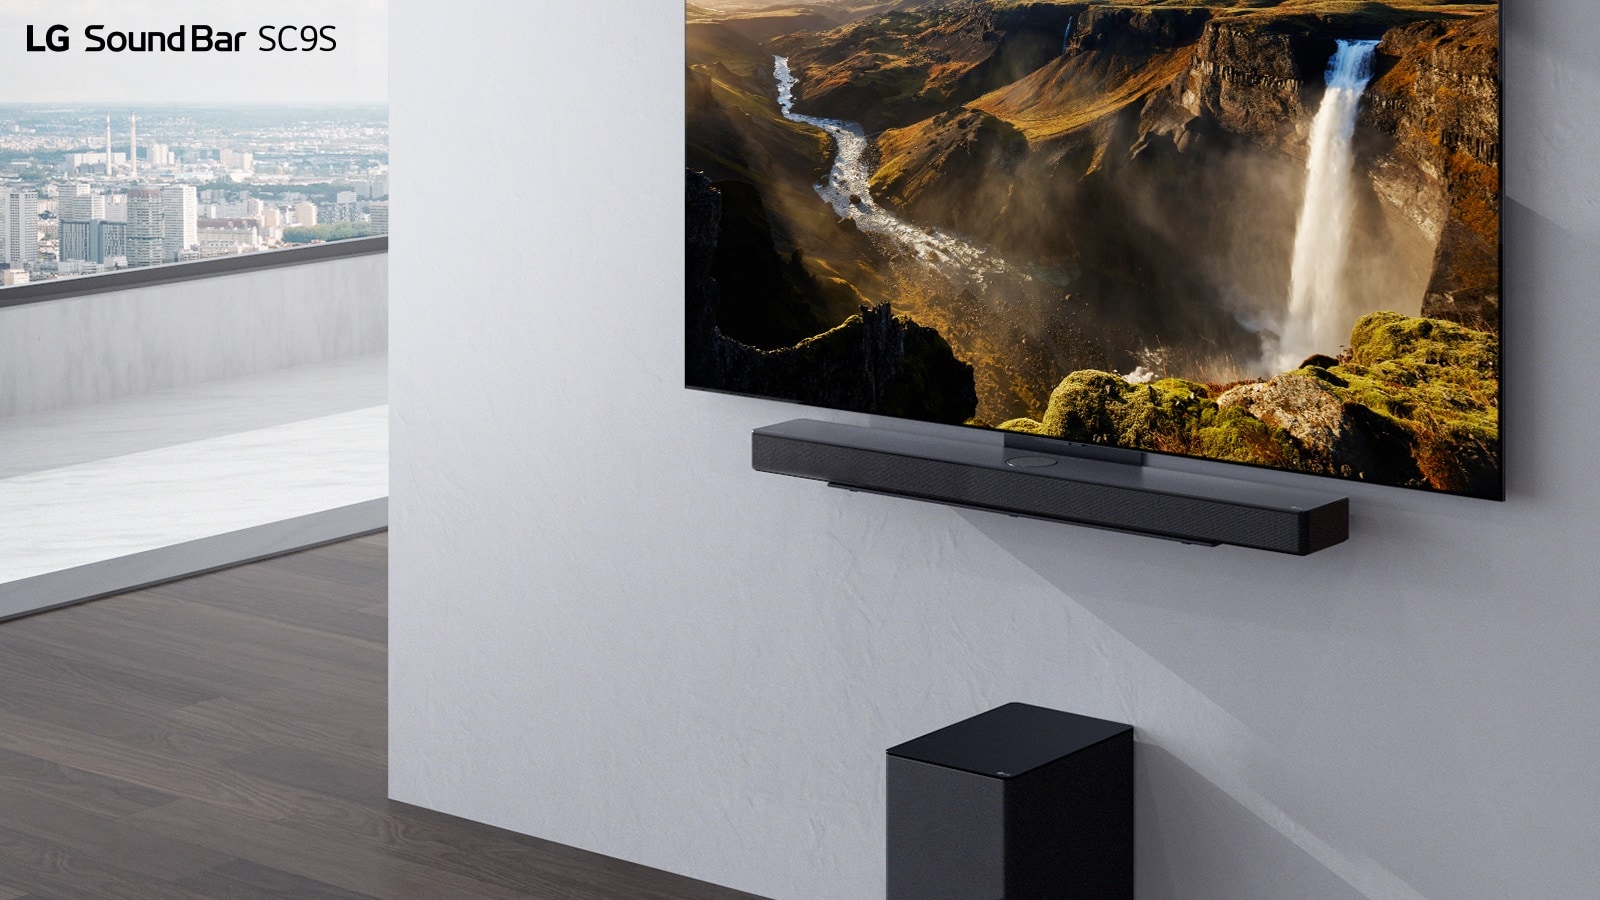 TV and LG Sound Bar SC9S are hung on a white wall. Below a black wireless subwoofer is placed on the floor. Beyond the window on the left a city view with the blue sky can be found.